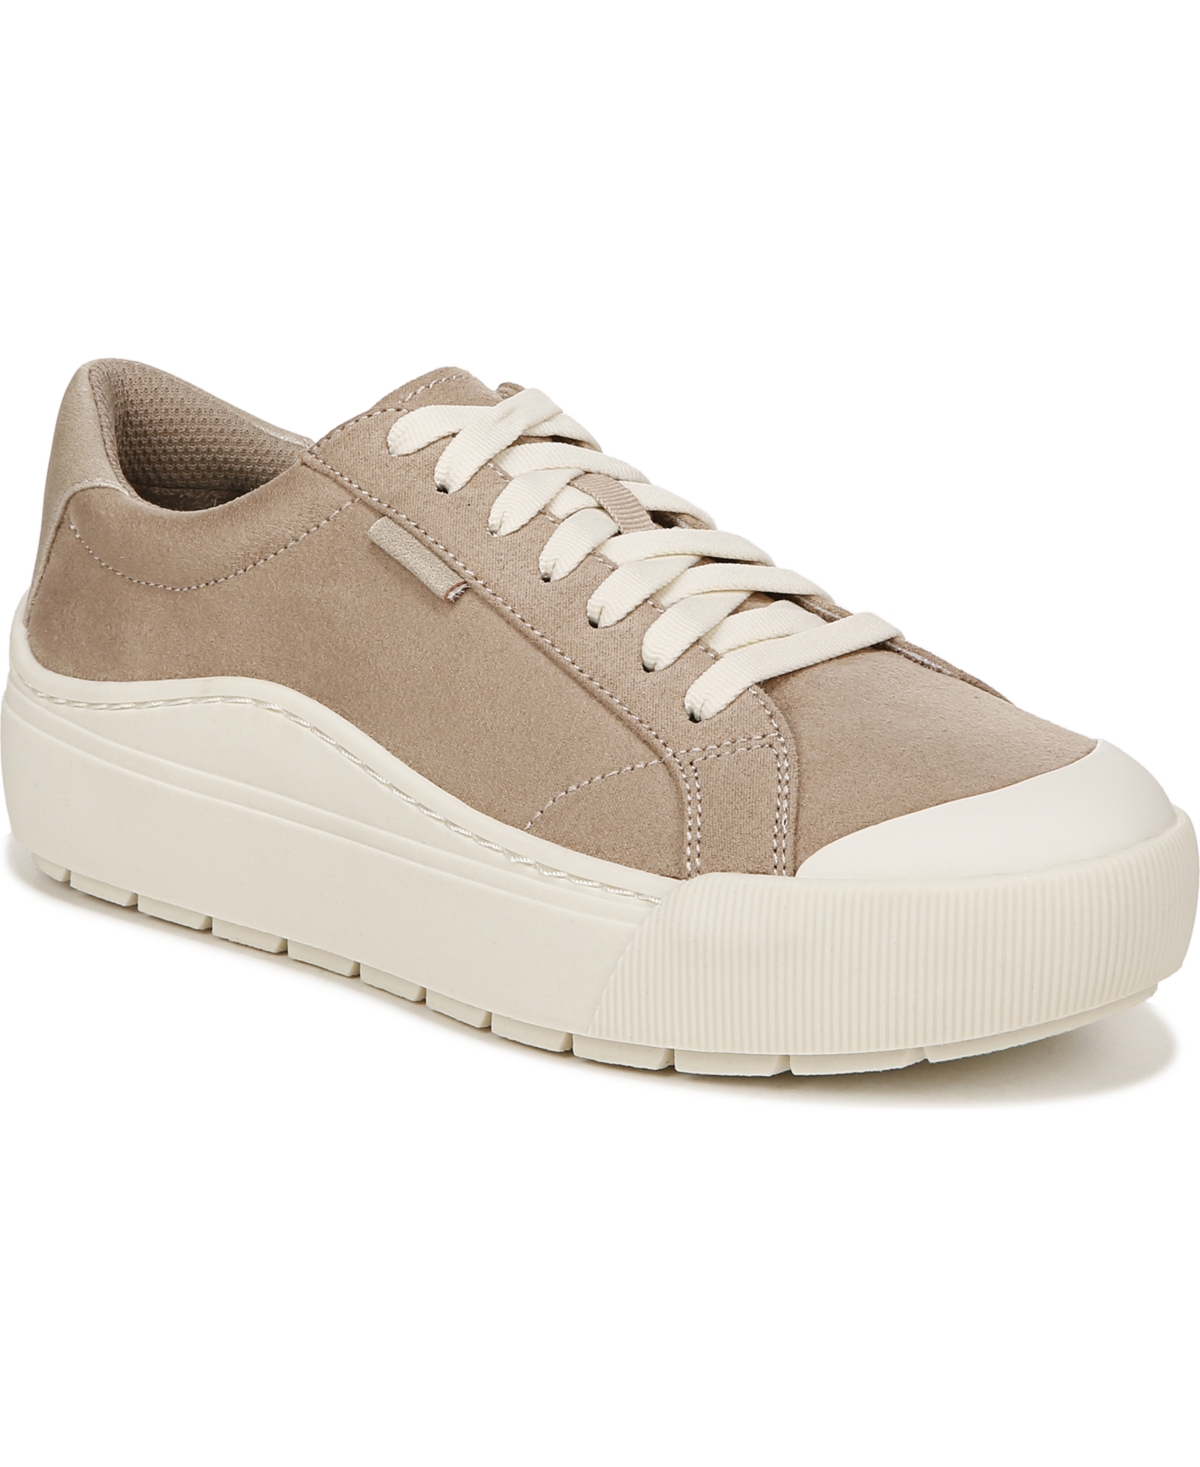 Women's Time Off Platform Sneakers - White Faux Leather